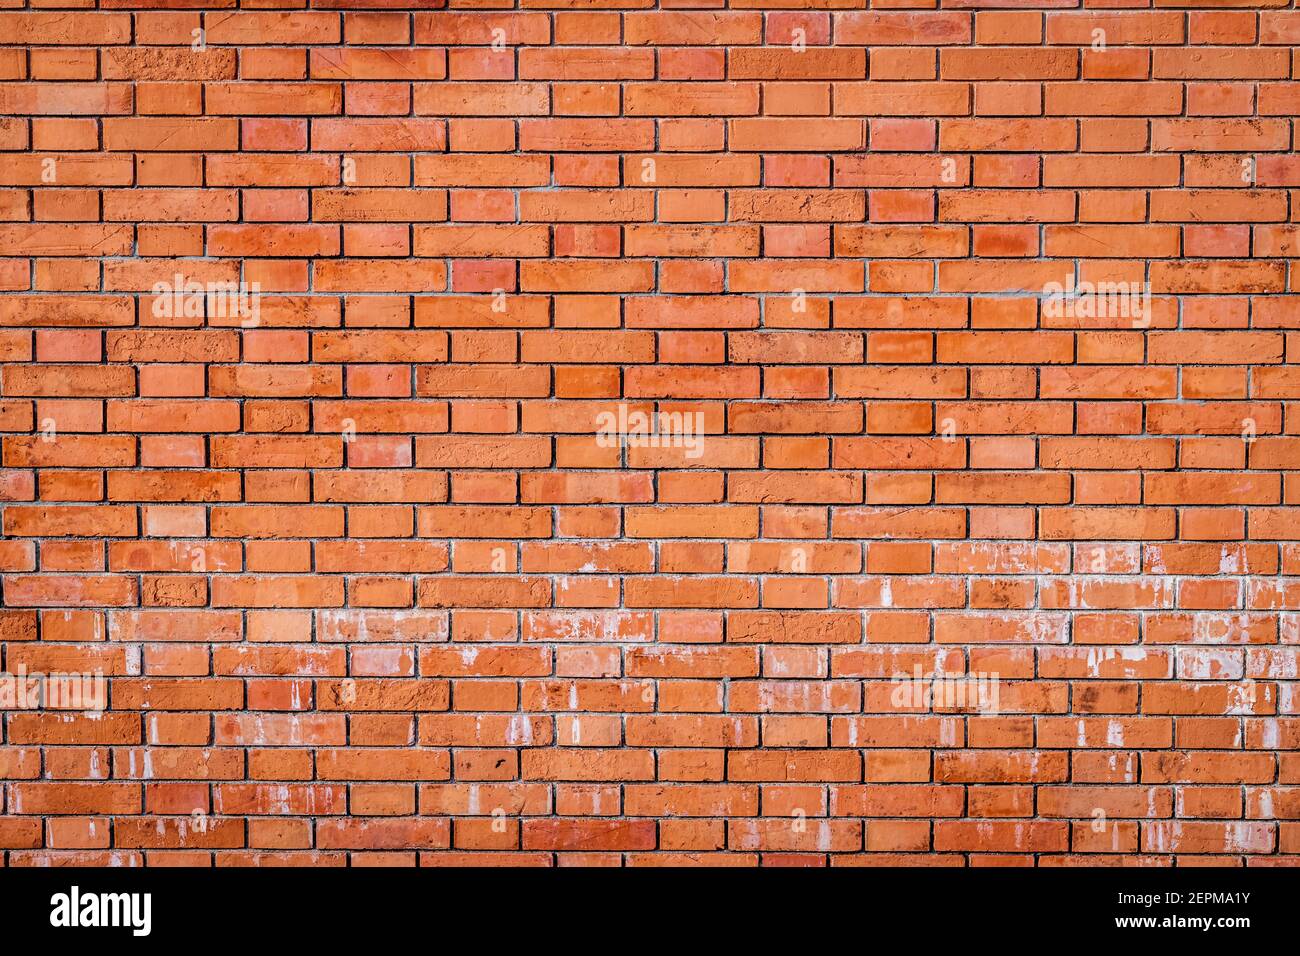 Red wallbrick background texture or pattern Stock Photo